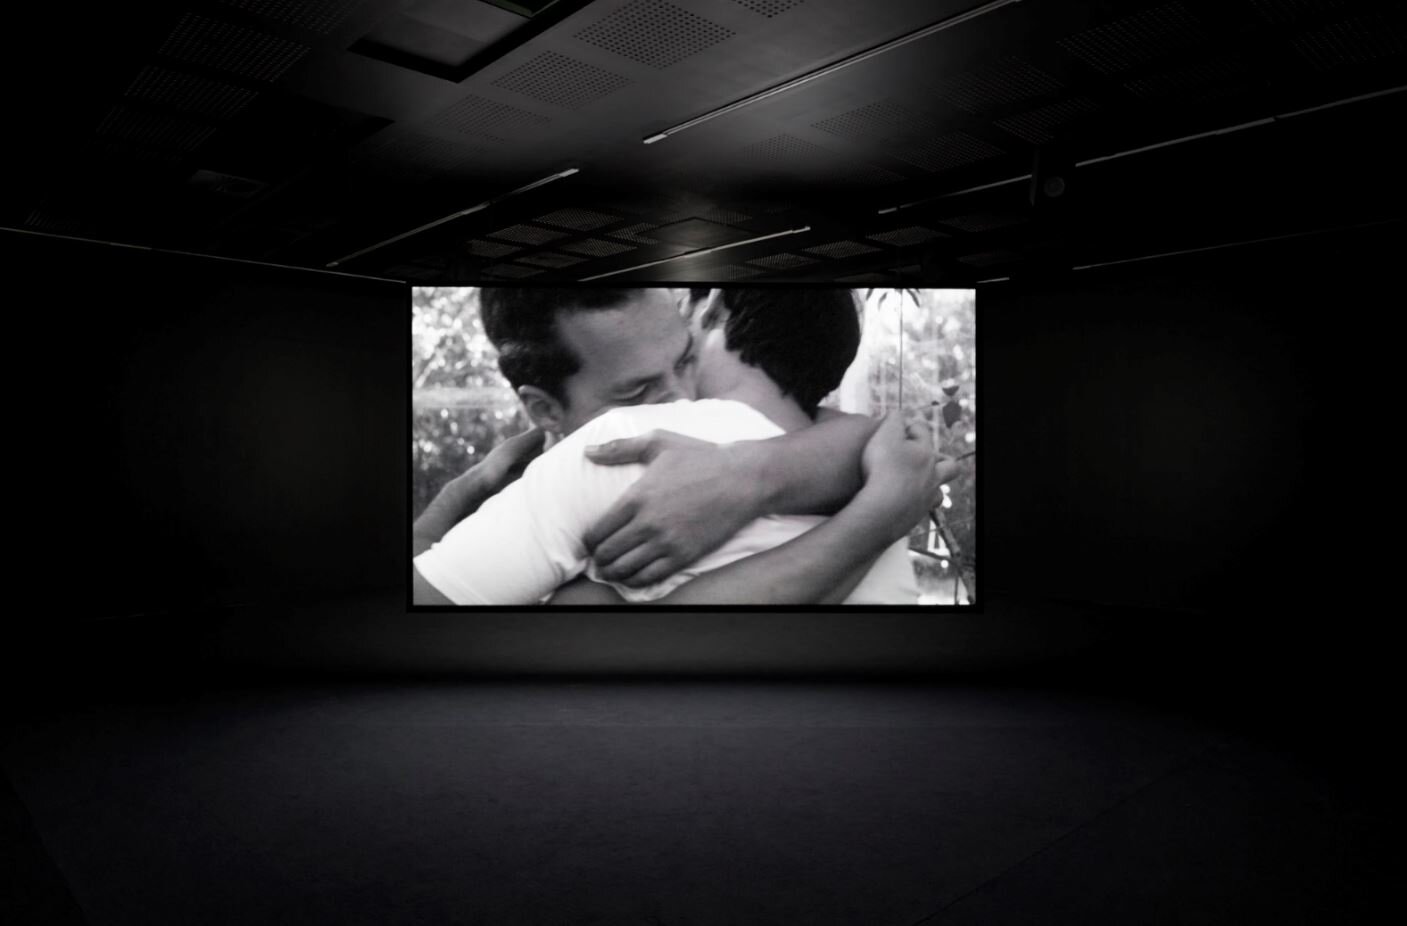  Shannon Te Ao,  my life as a tunnel , 2018, installation view, ‘Wansolwara: One Salt Water’, UNSW Galleries, Sydney, 2020; two-channel HD video with sound, 9:48mins duration; cinematographer Iain Frengley; courtesy the artist and Mossman, Wellington